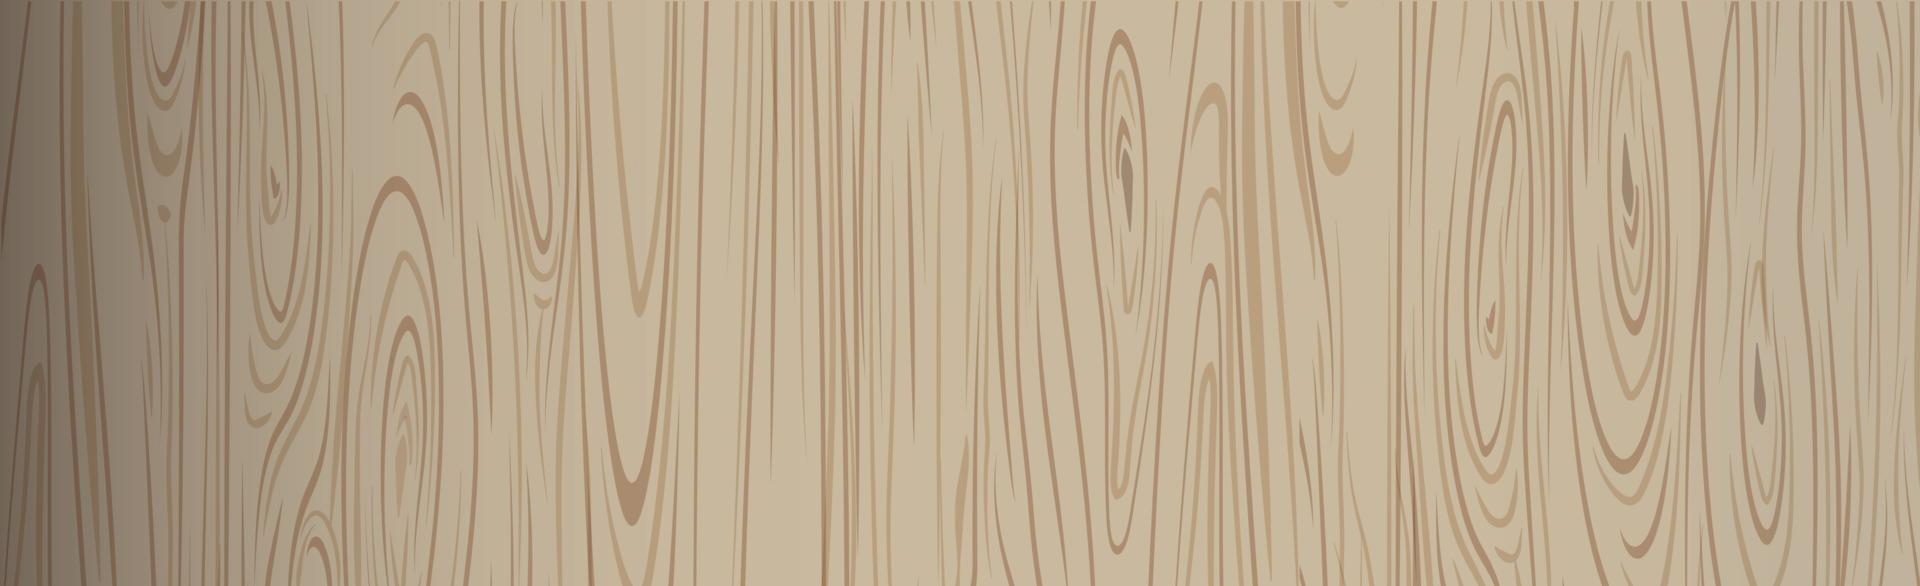 Realistic texture pattern of dark wood, background - Vector